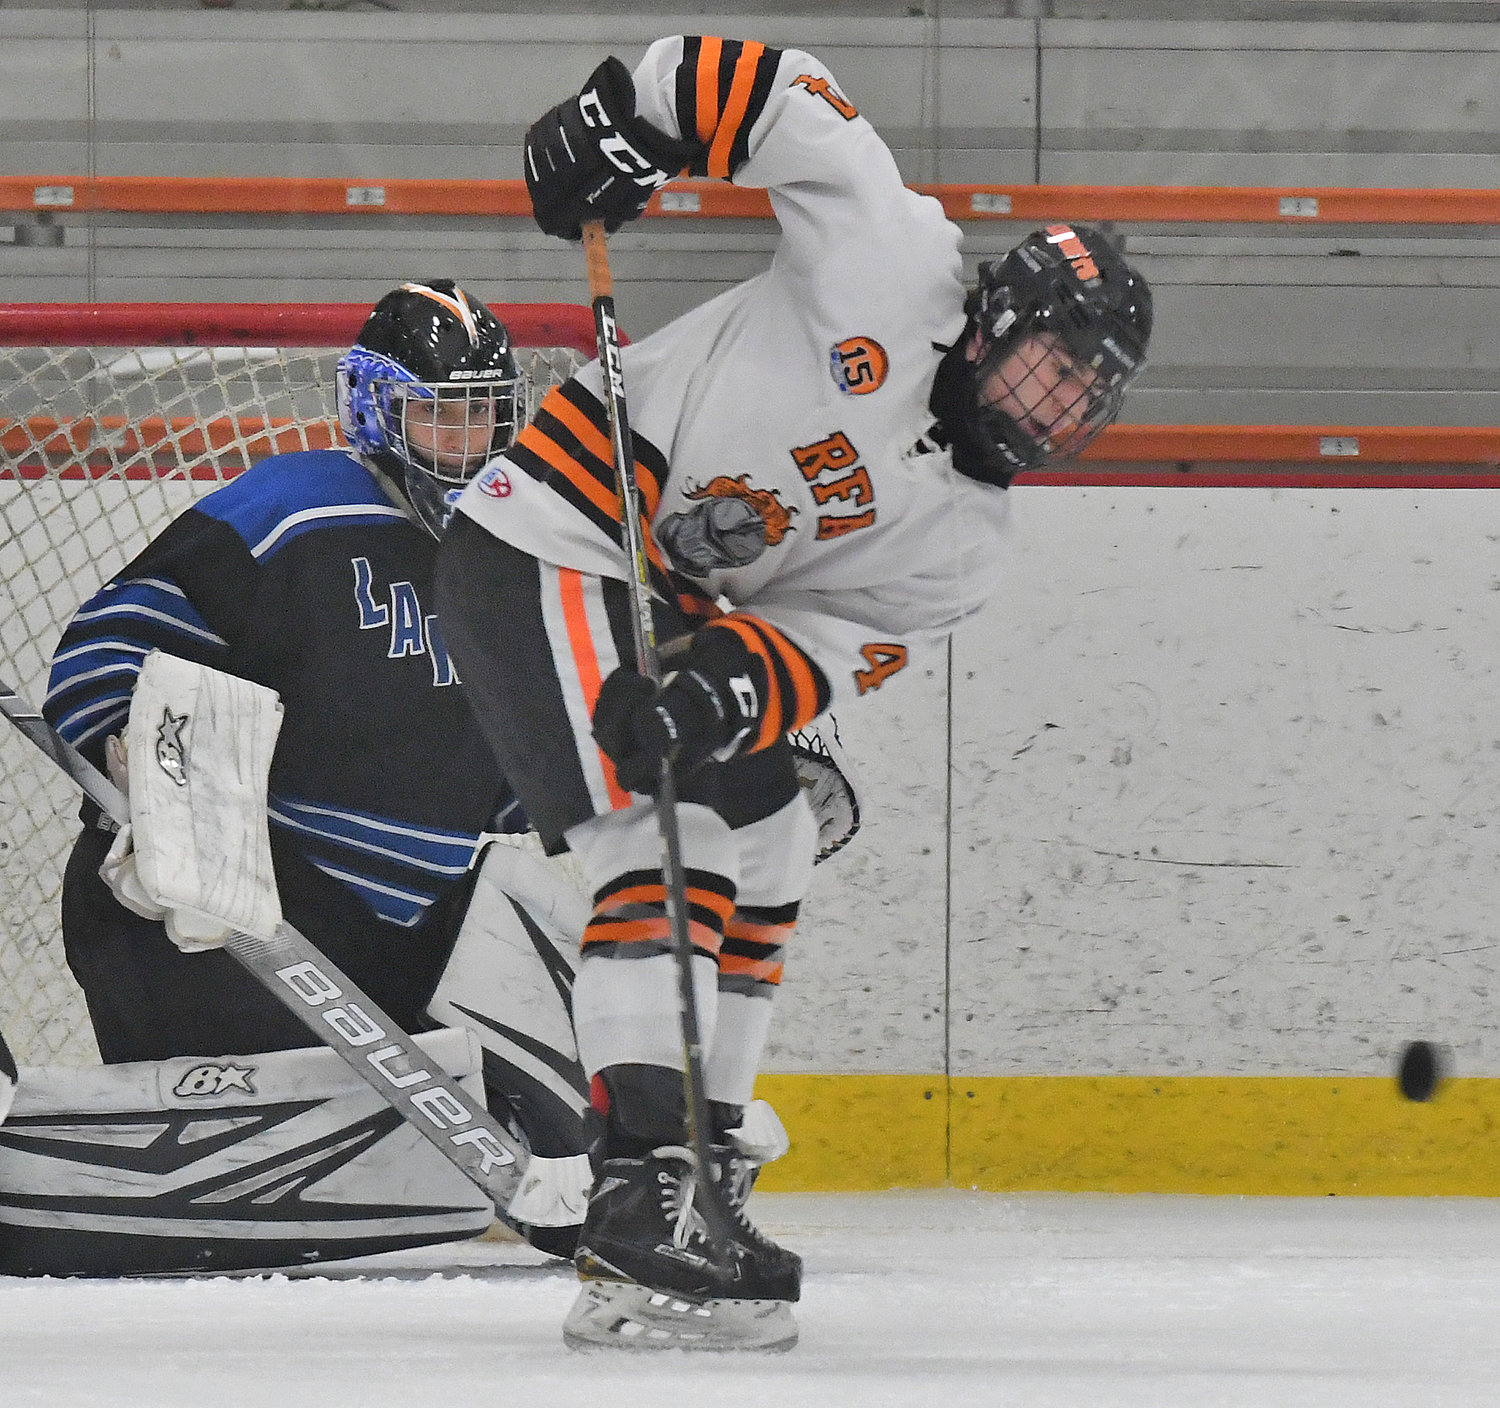 RFA #4 in front of the Geneseo goalie in the first period.